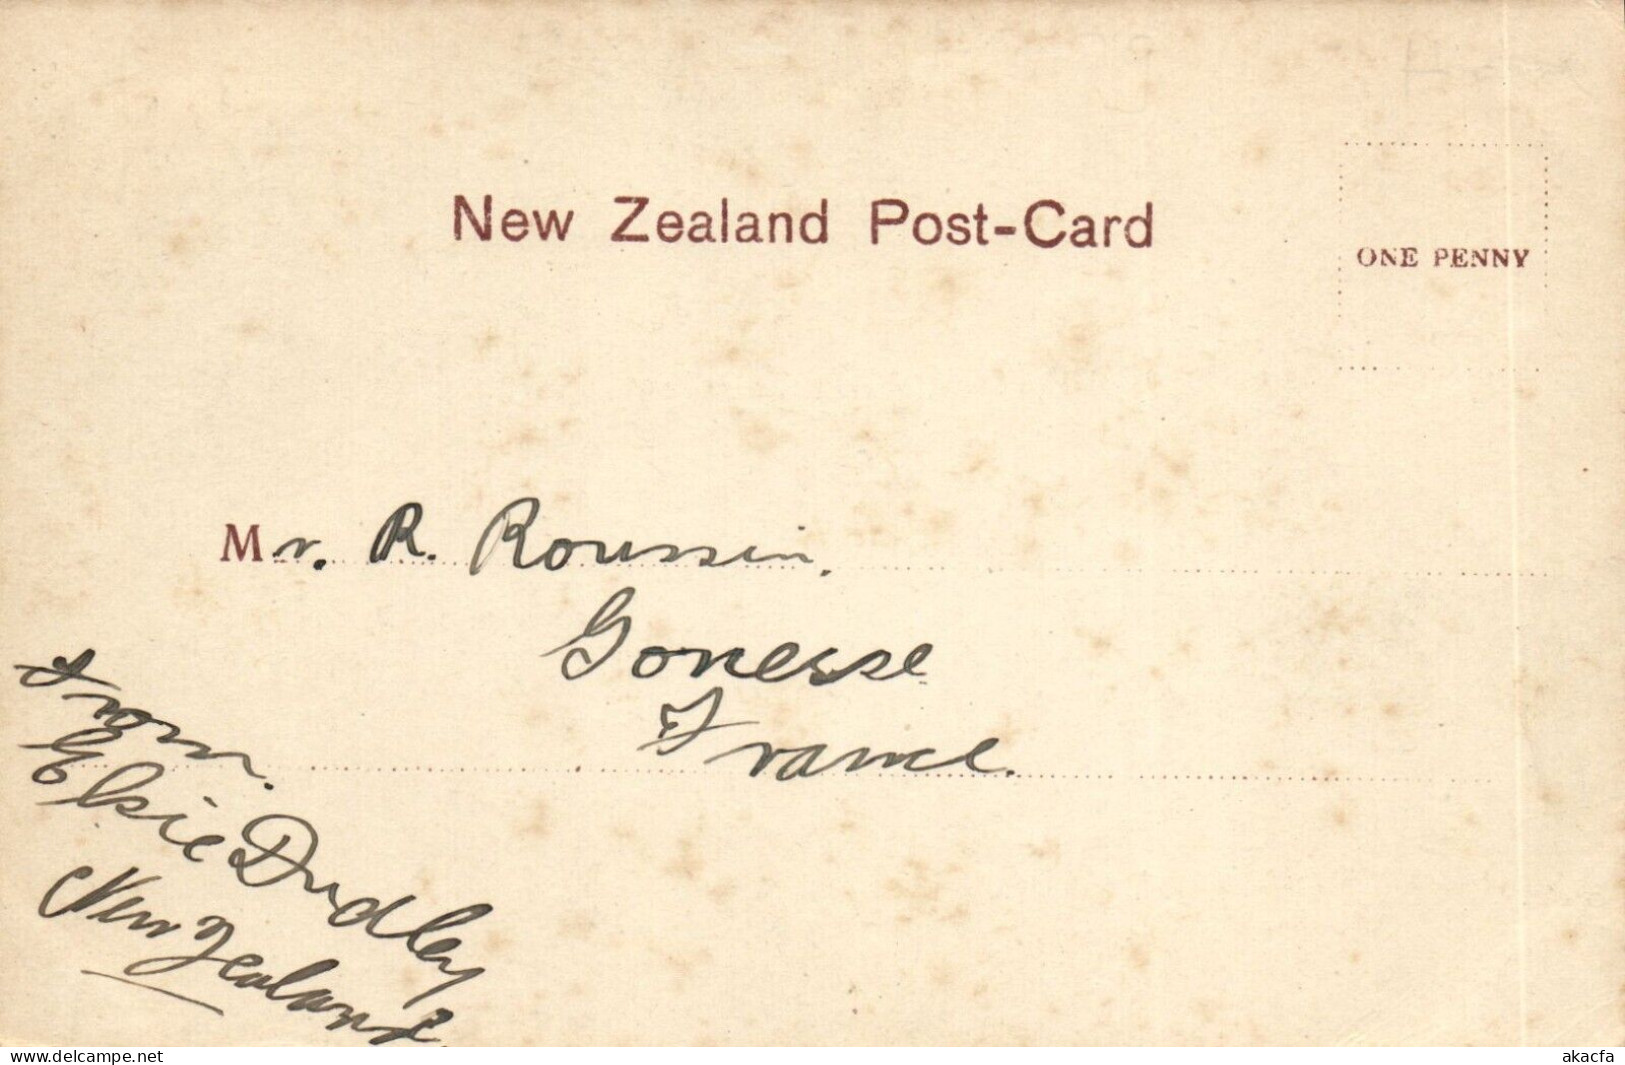 PC NEW ZEALAND THE MAORI YOUTH AND BEAUTY TYPES, VINTAGE POSTCARD (b53647) - New Zealand